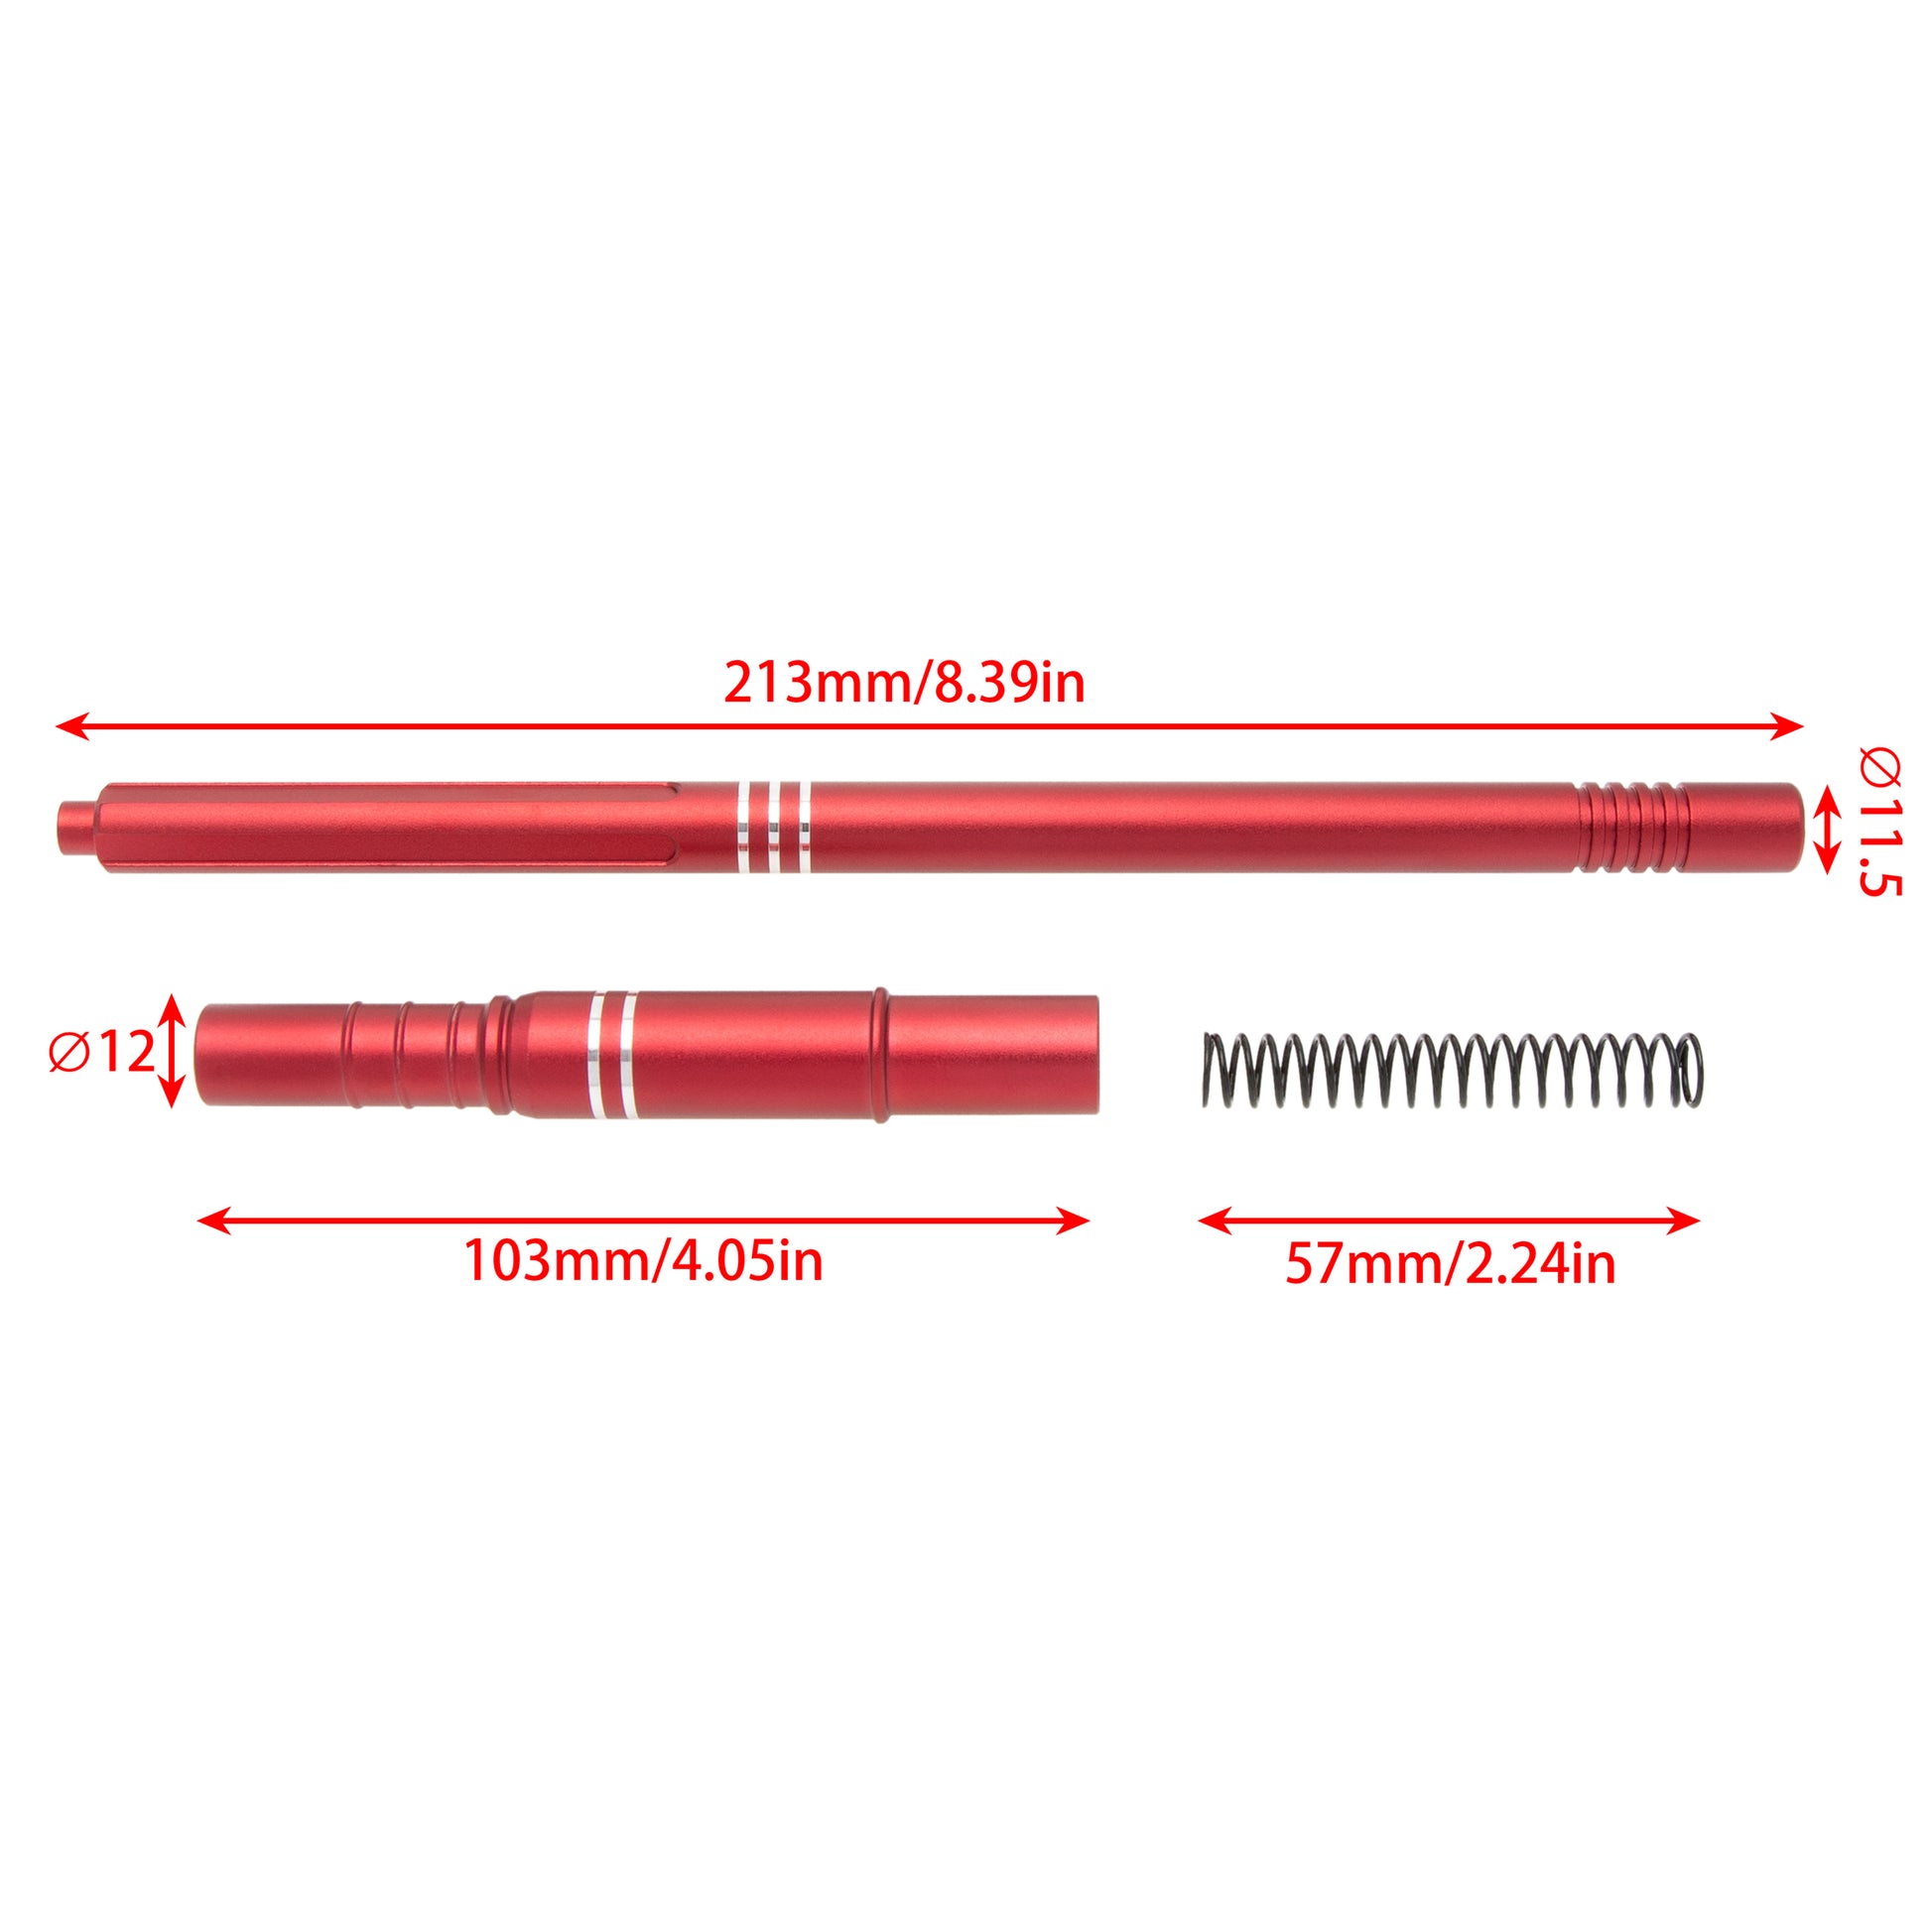 Red ARRMA 1/8 Mojave 4X4 4S BLX Center Drive Shaft size